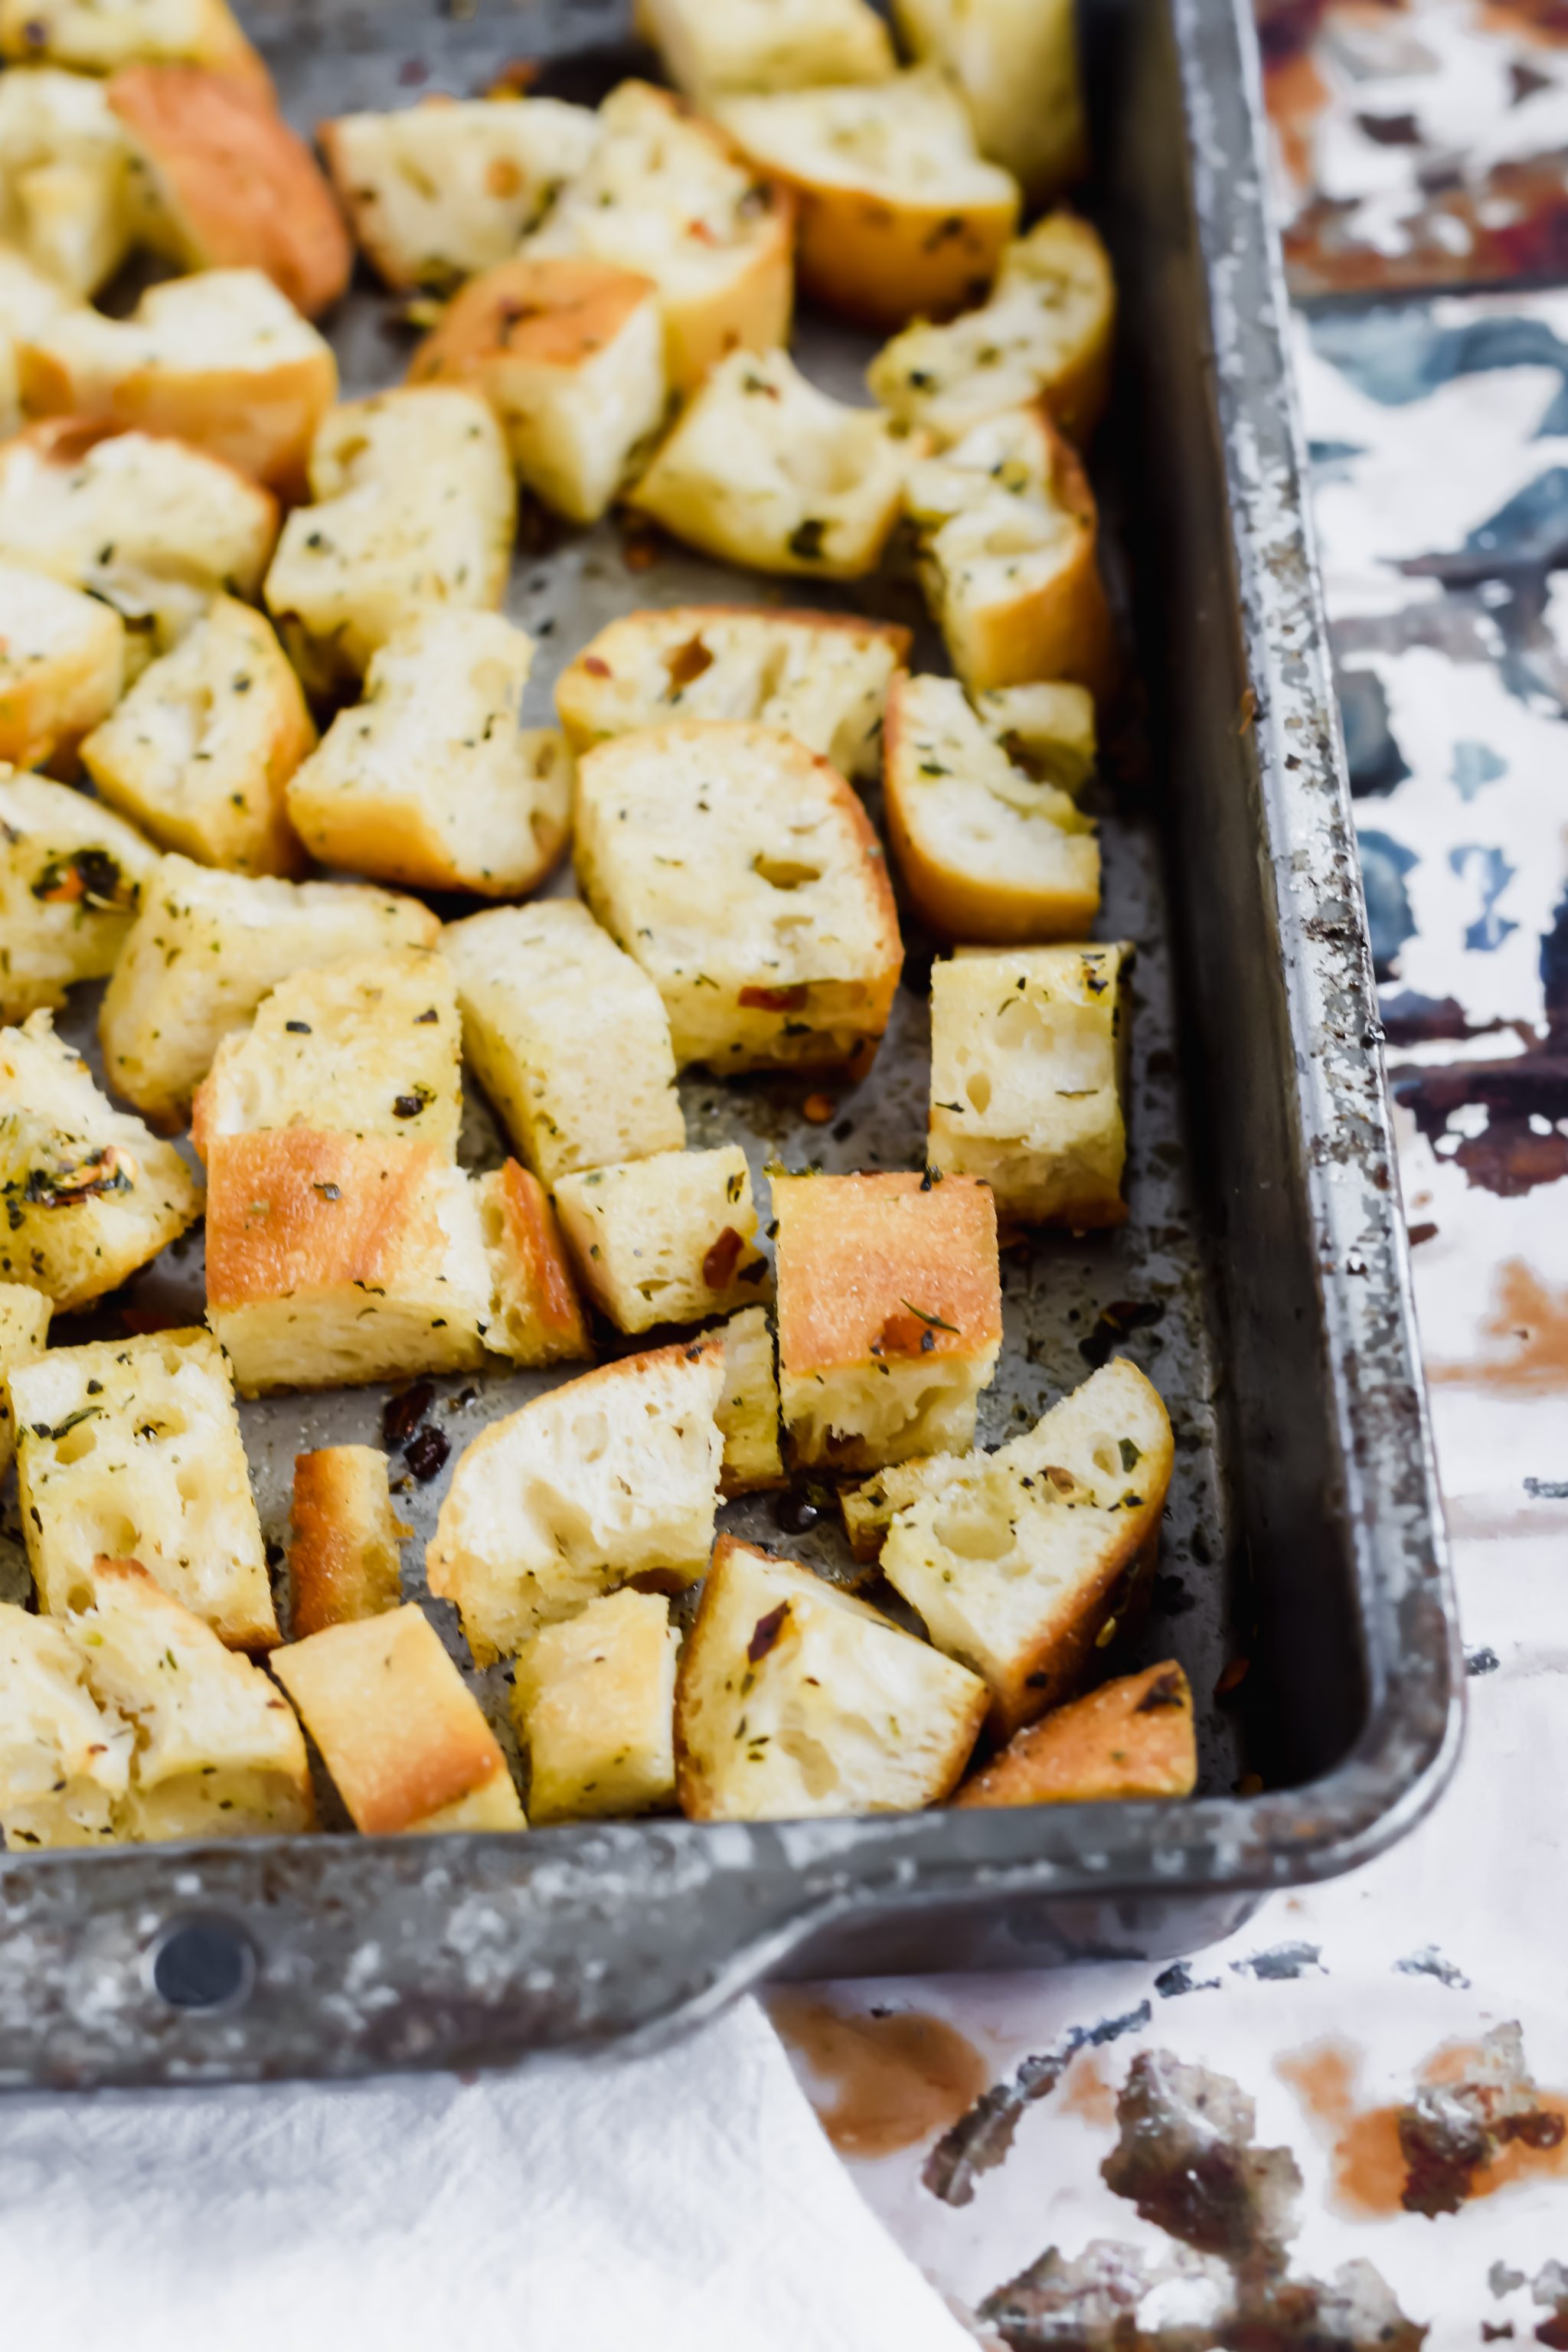 metal sheet pan with toasted homemade croutons on antique tile in the background